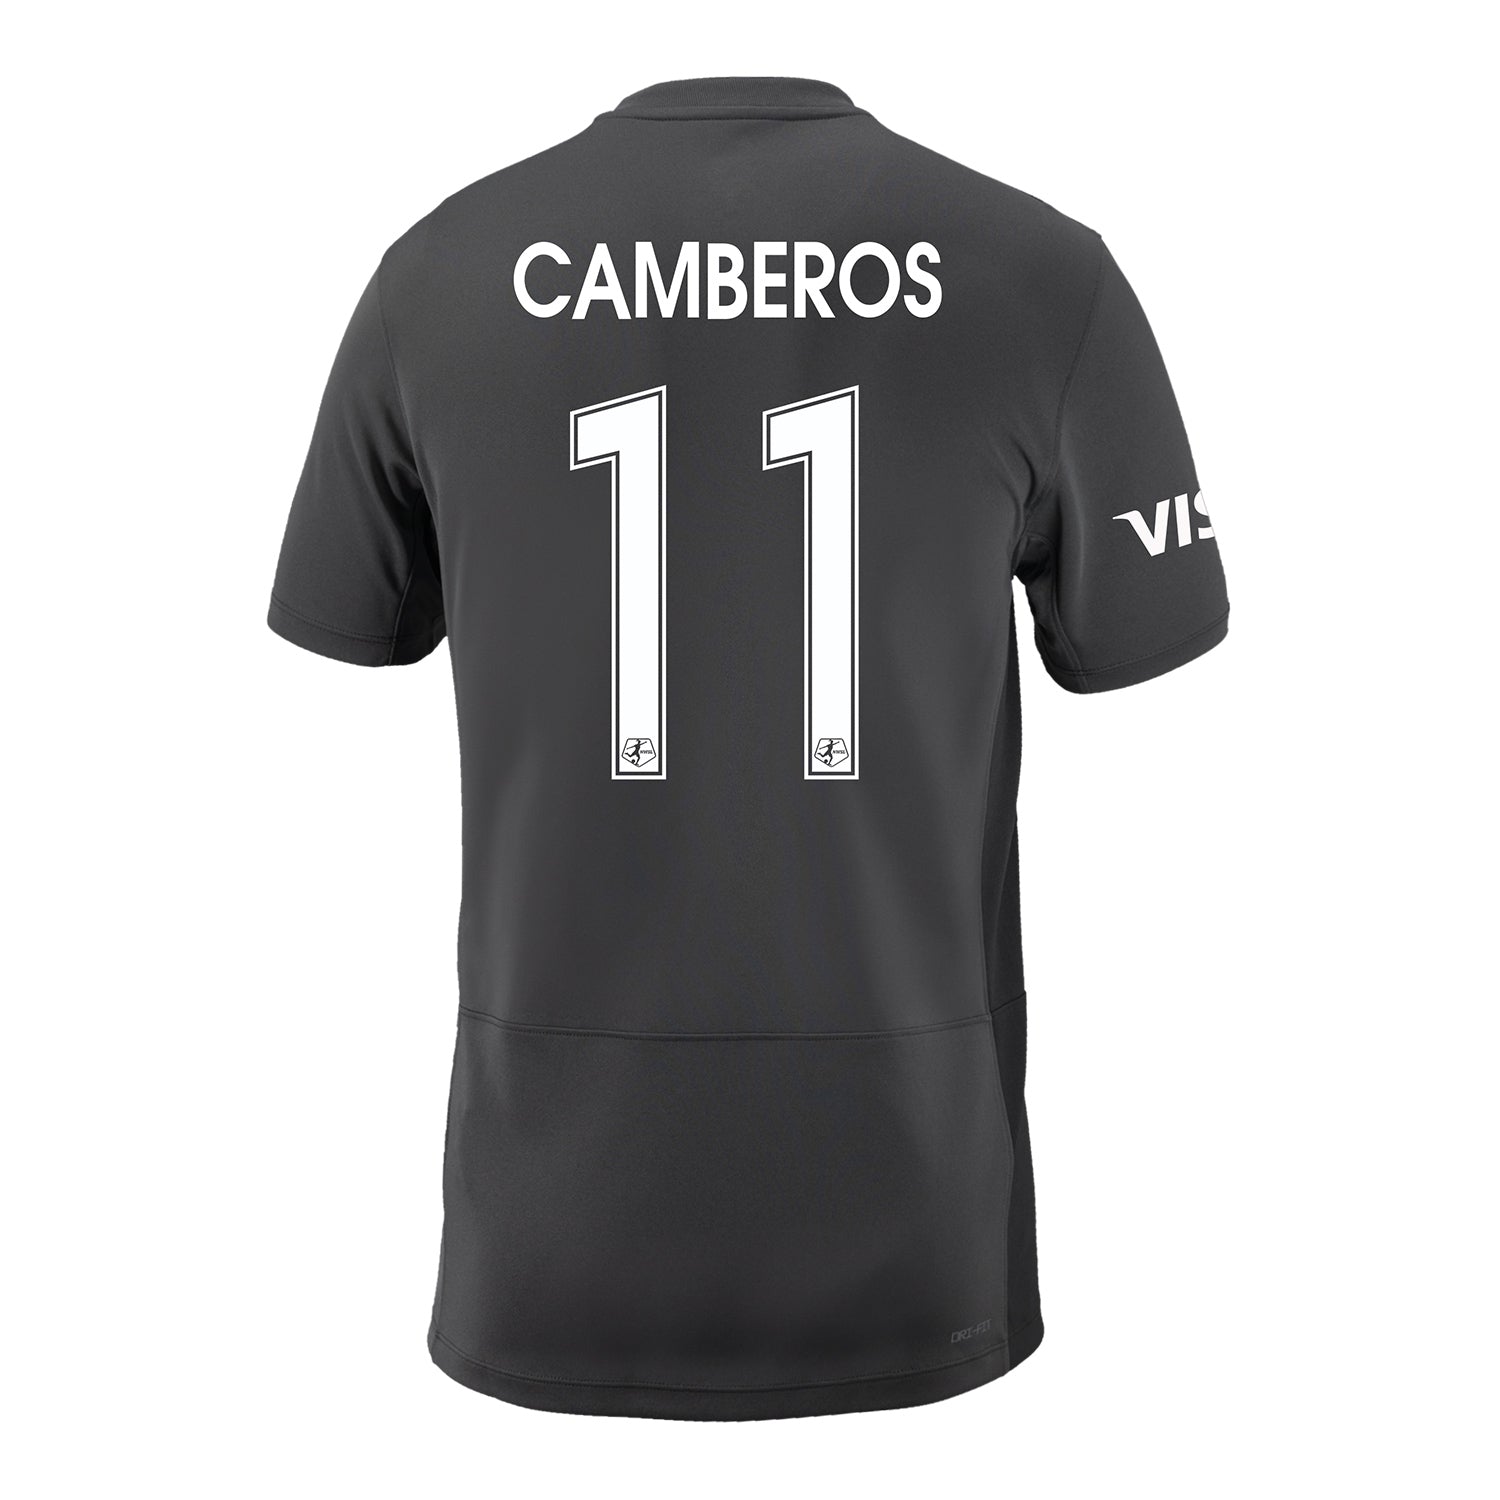 Youth Bay FC Scarlett Camberos Secondary Jersey - Back View